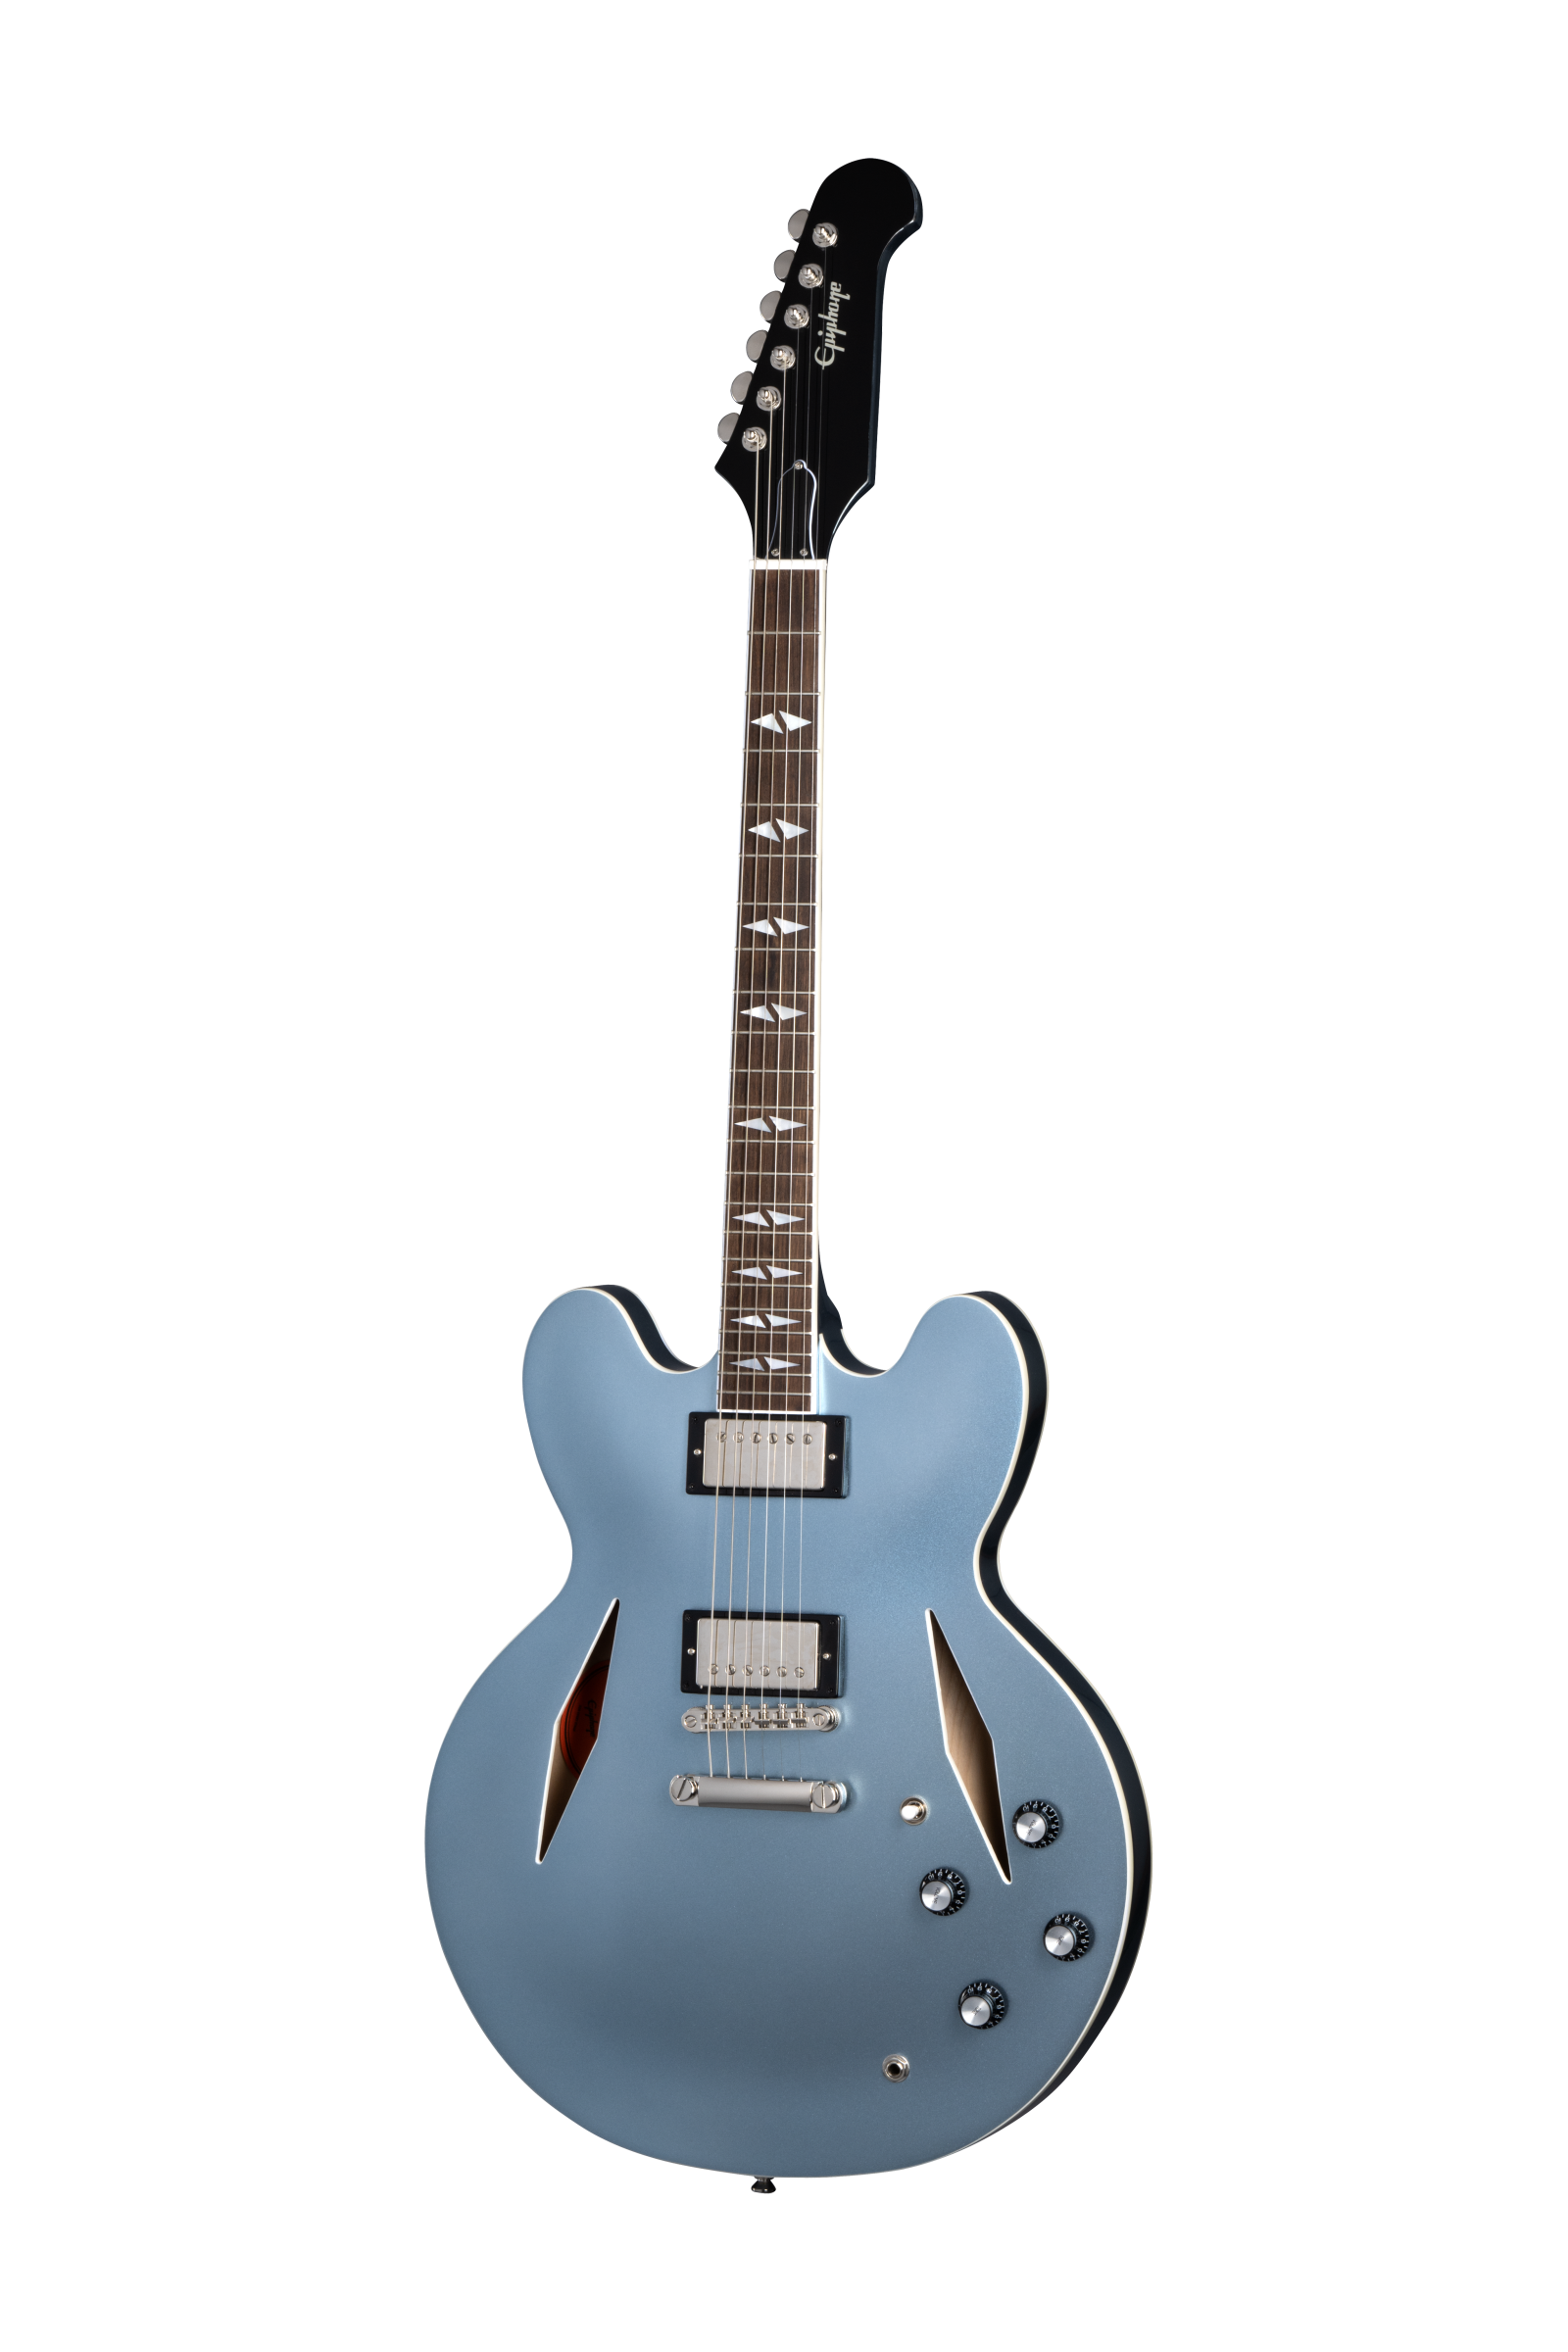 EPIPHONE Dave Grohl DG-335 (Incl. Hard Case)